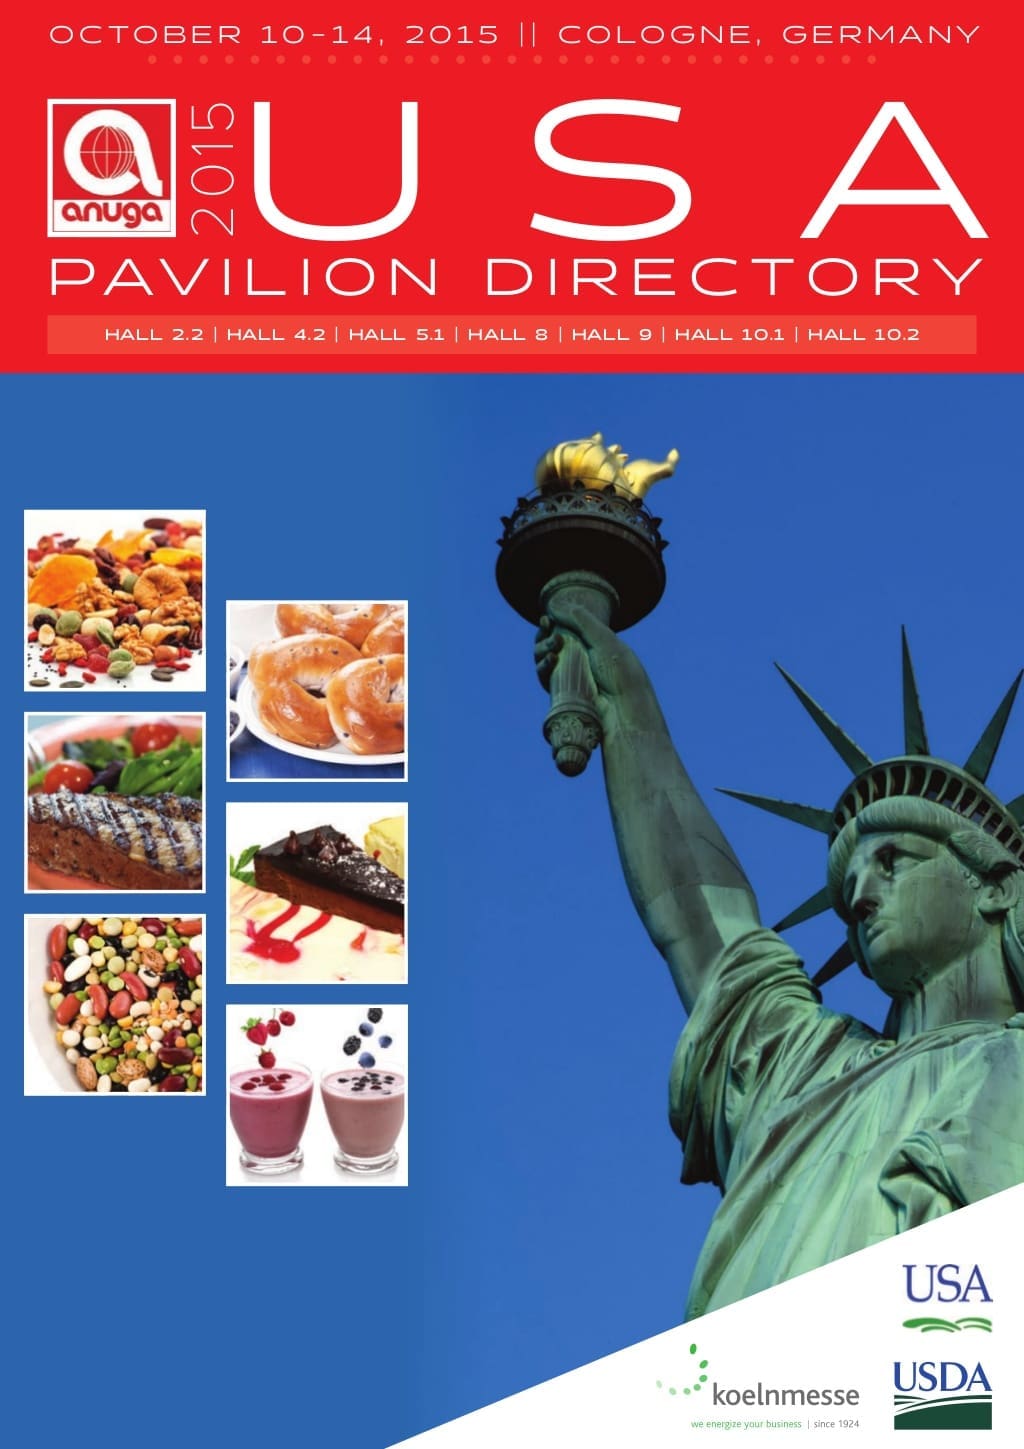 ANUGA 2015 SETTING NEW RECORDS IN U.S. PARTICIPATION 7 USA Pavilions – New Product Showcase USA – Product Guide